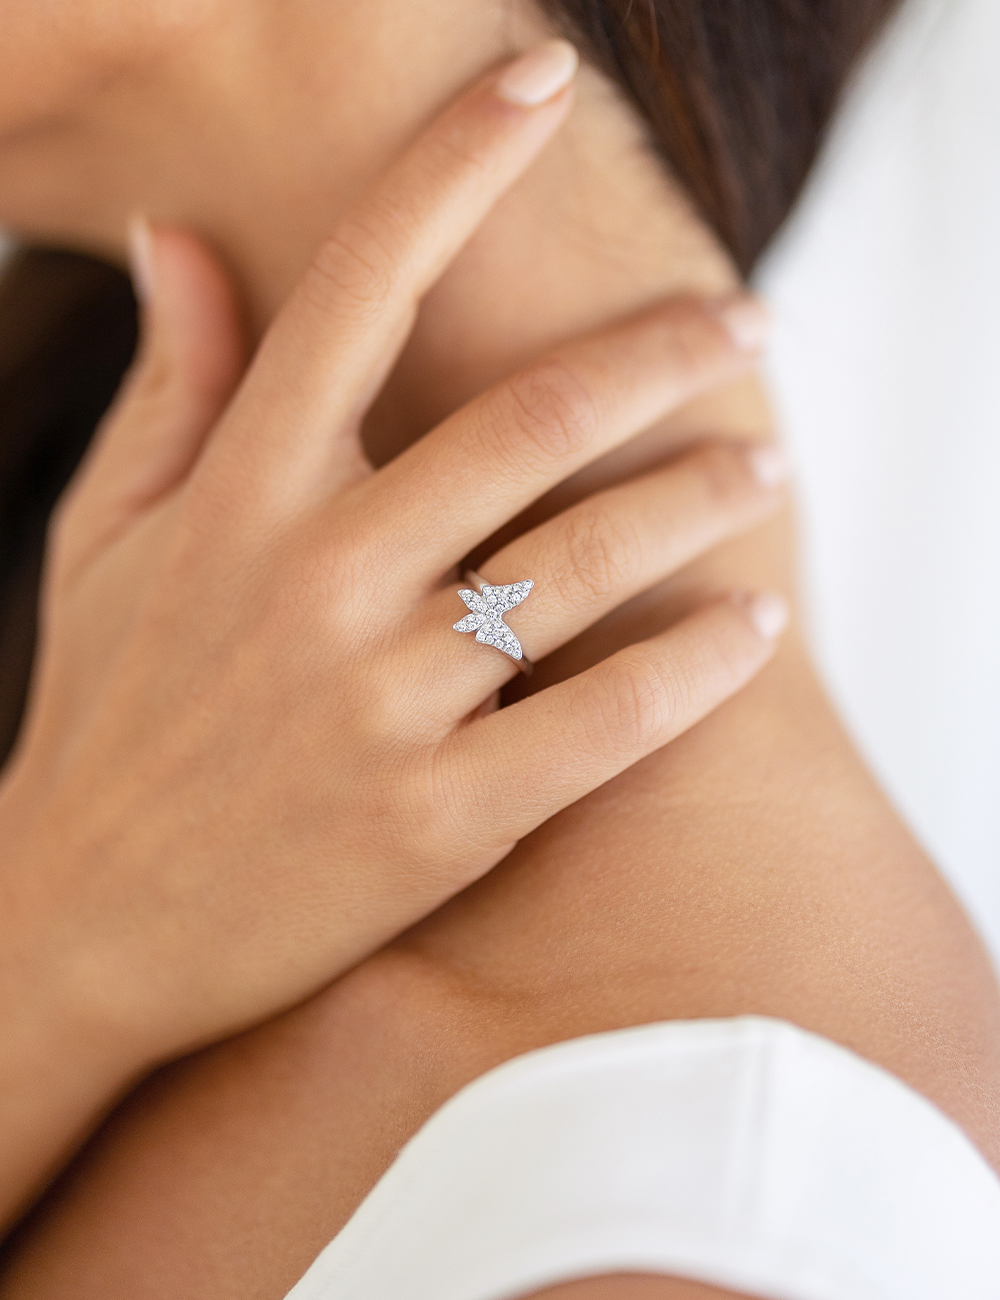 Musson ‘White Butterfly’ diamond ring supports cancer research